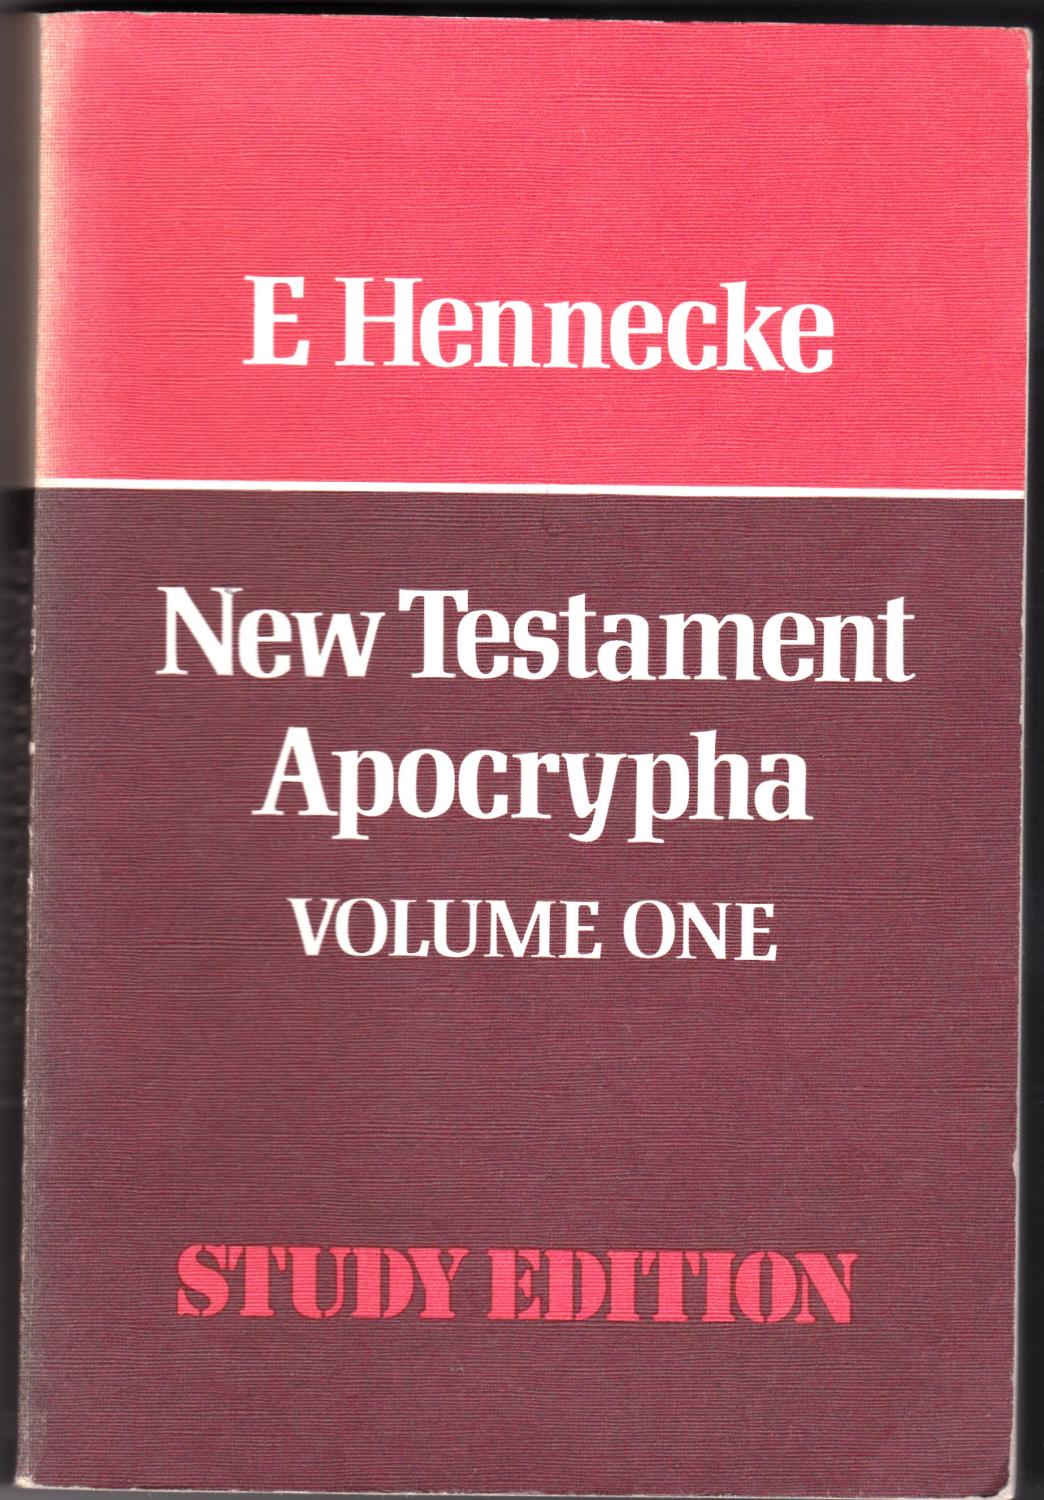 New Testament Apocrypha Volume 1. Gospels and related writings. Study edition - Hennecke, E